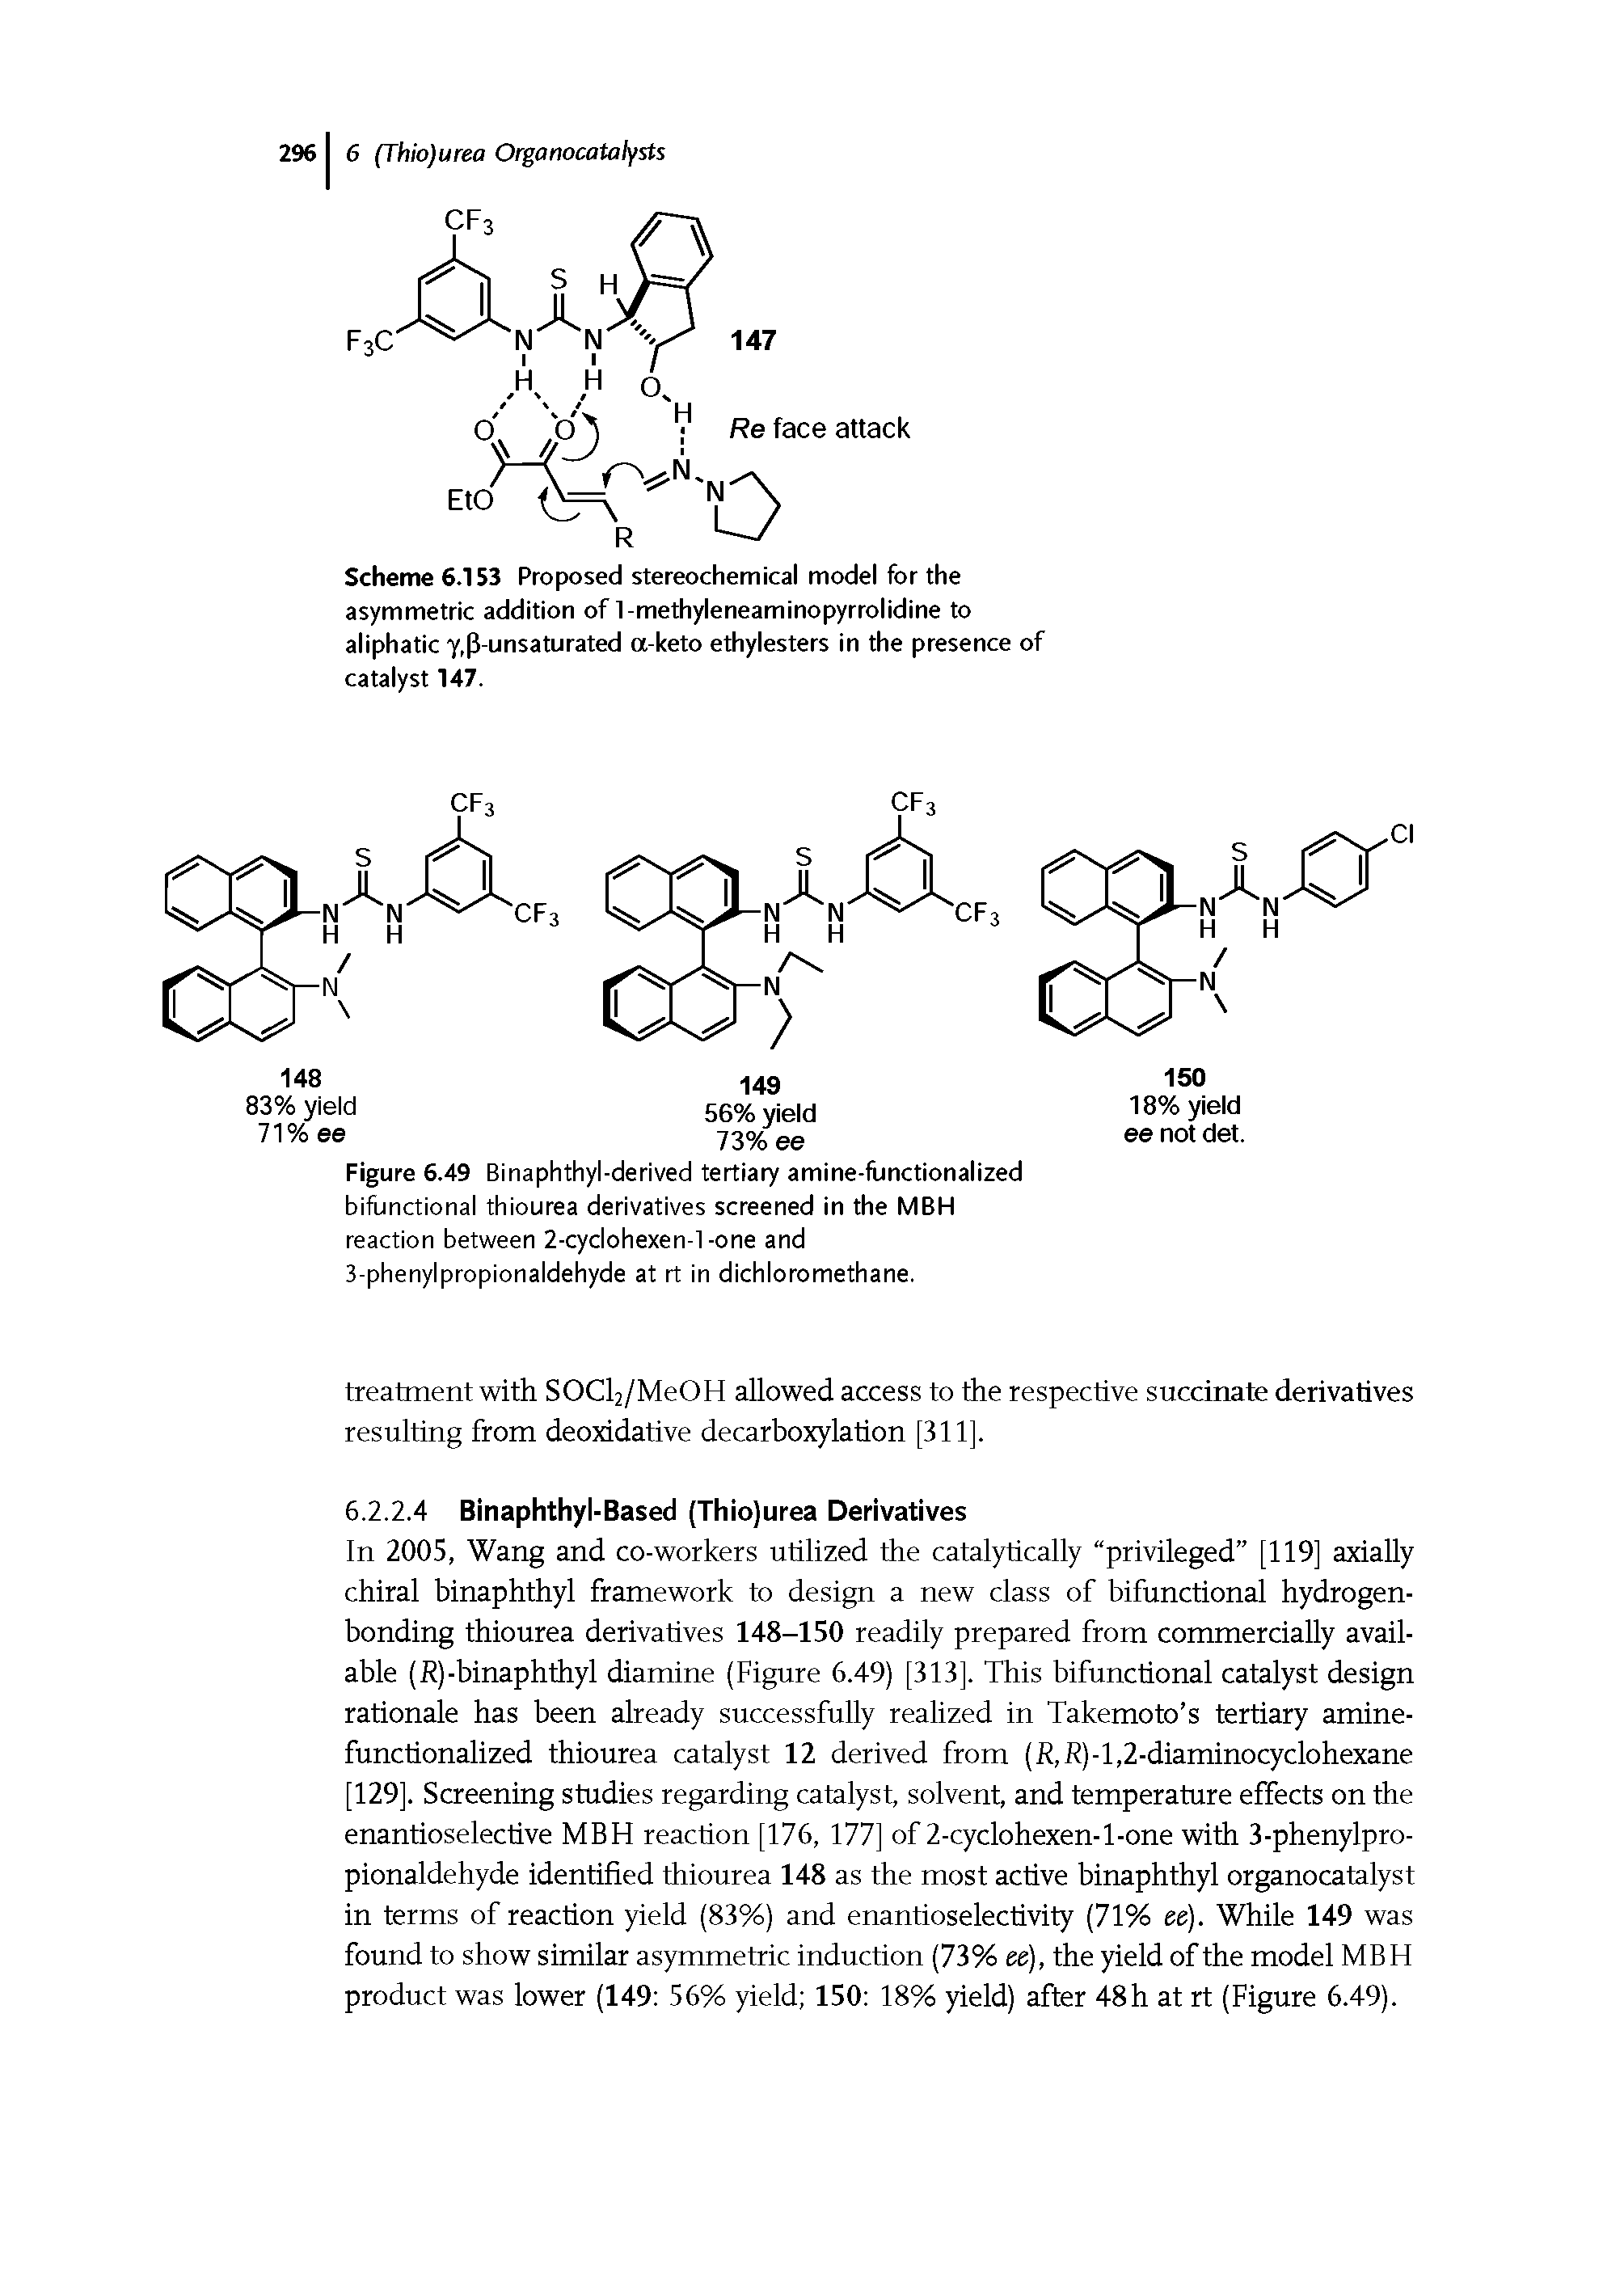 Figure 6.49 Binaphthyl-derived tertiary amine-functionalized bifunctional thiourea derivatives screened in the MBH reaction between 2-cyclohexen-l-one and 3-phenylpropionaldehyde at rt in dichloromethane.